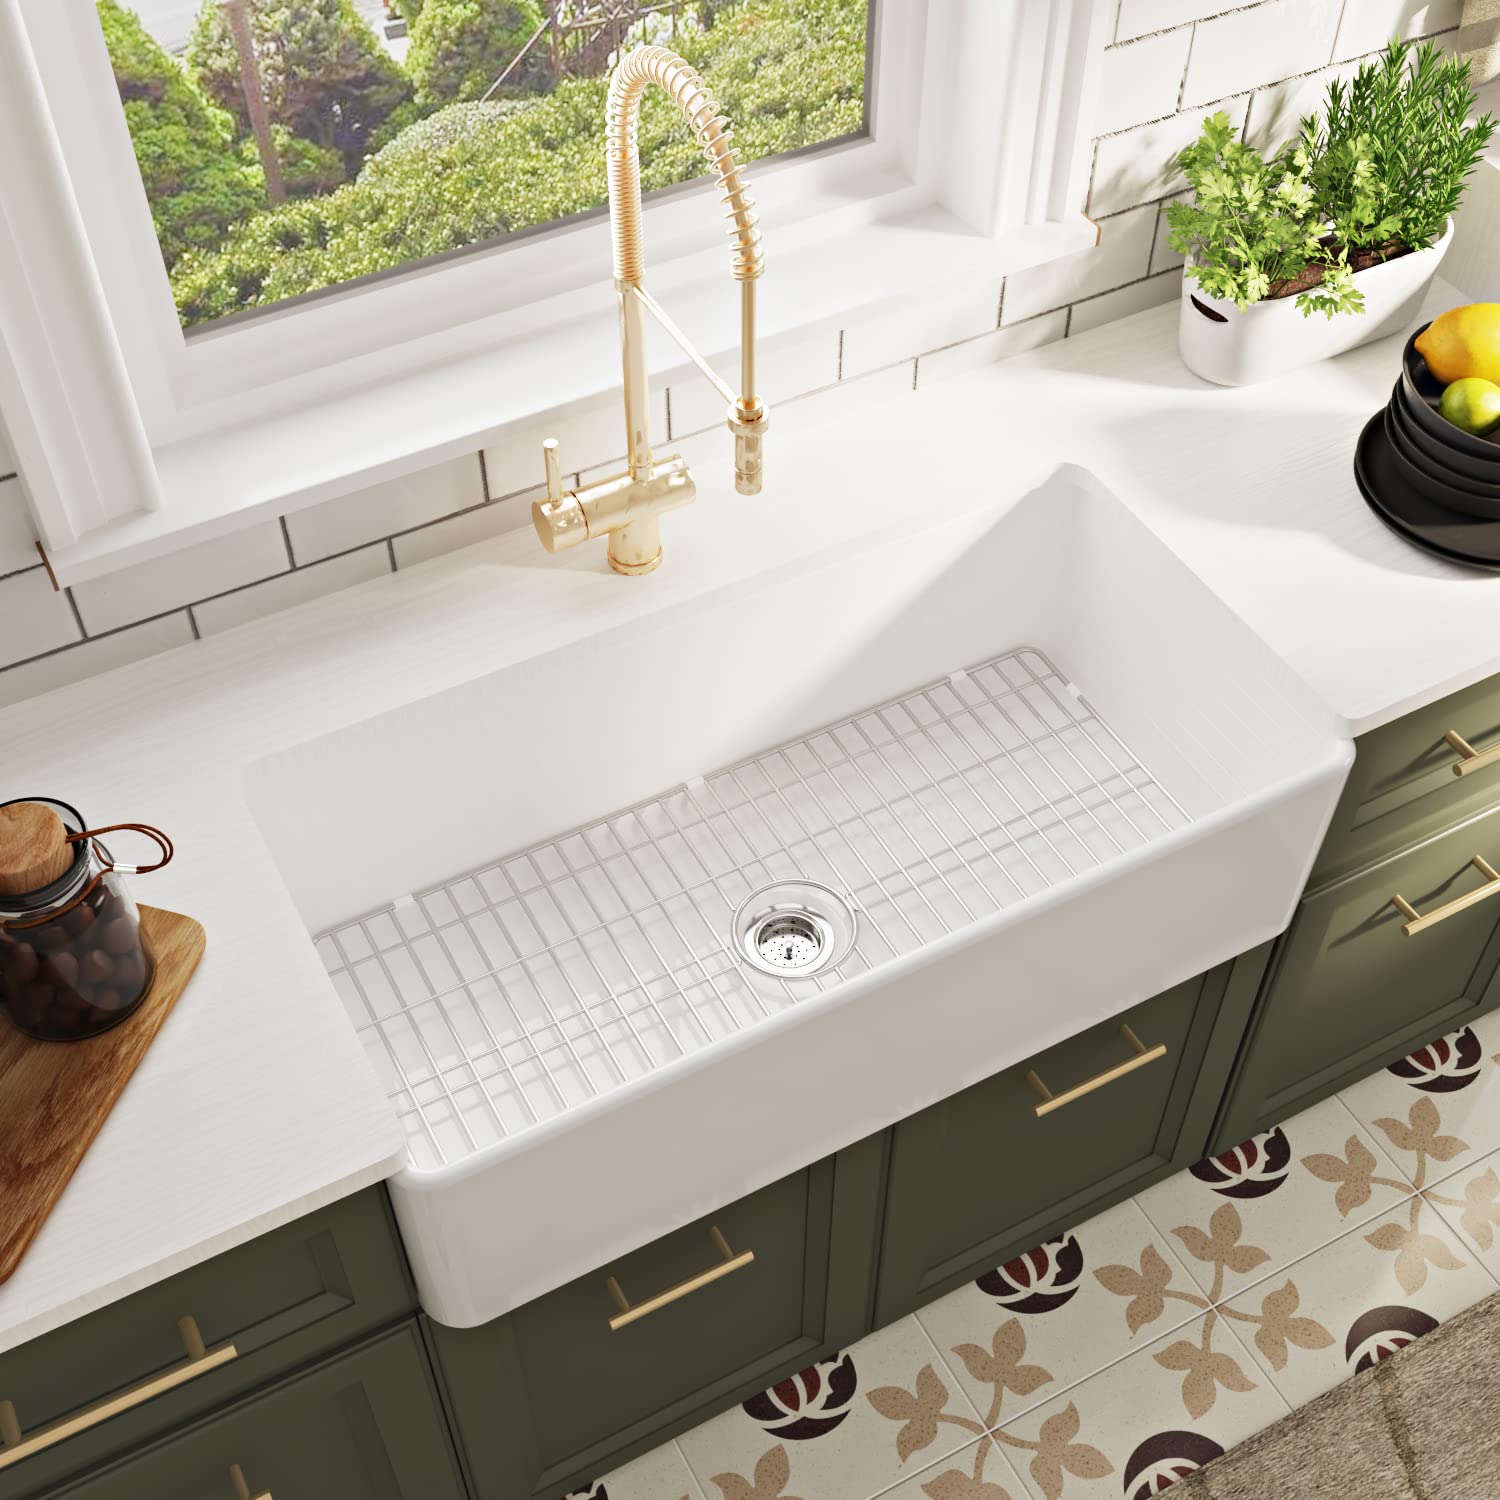 DeerValley Farmhouse Sink, DV-1K505 Grove 36"L x 18"W Fireclay Farmhouse Sink White Apron Front Deep Single Bowl Kitchen Sink with Sink Grid and Basket Strainer